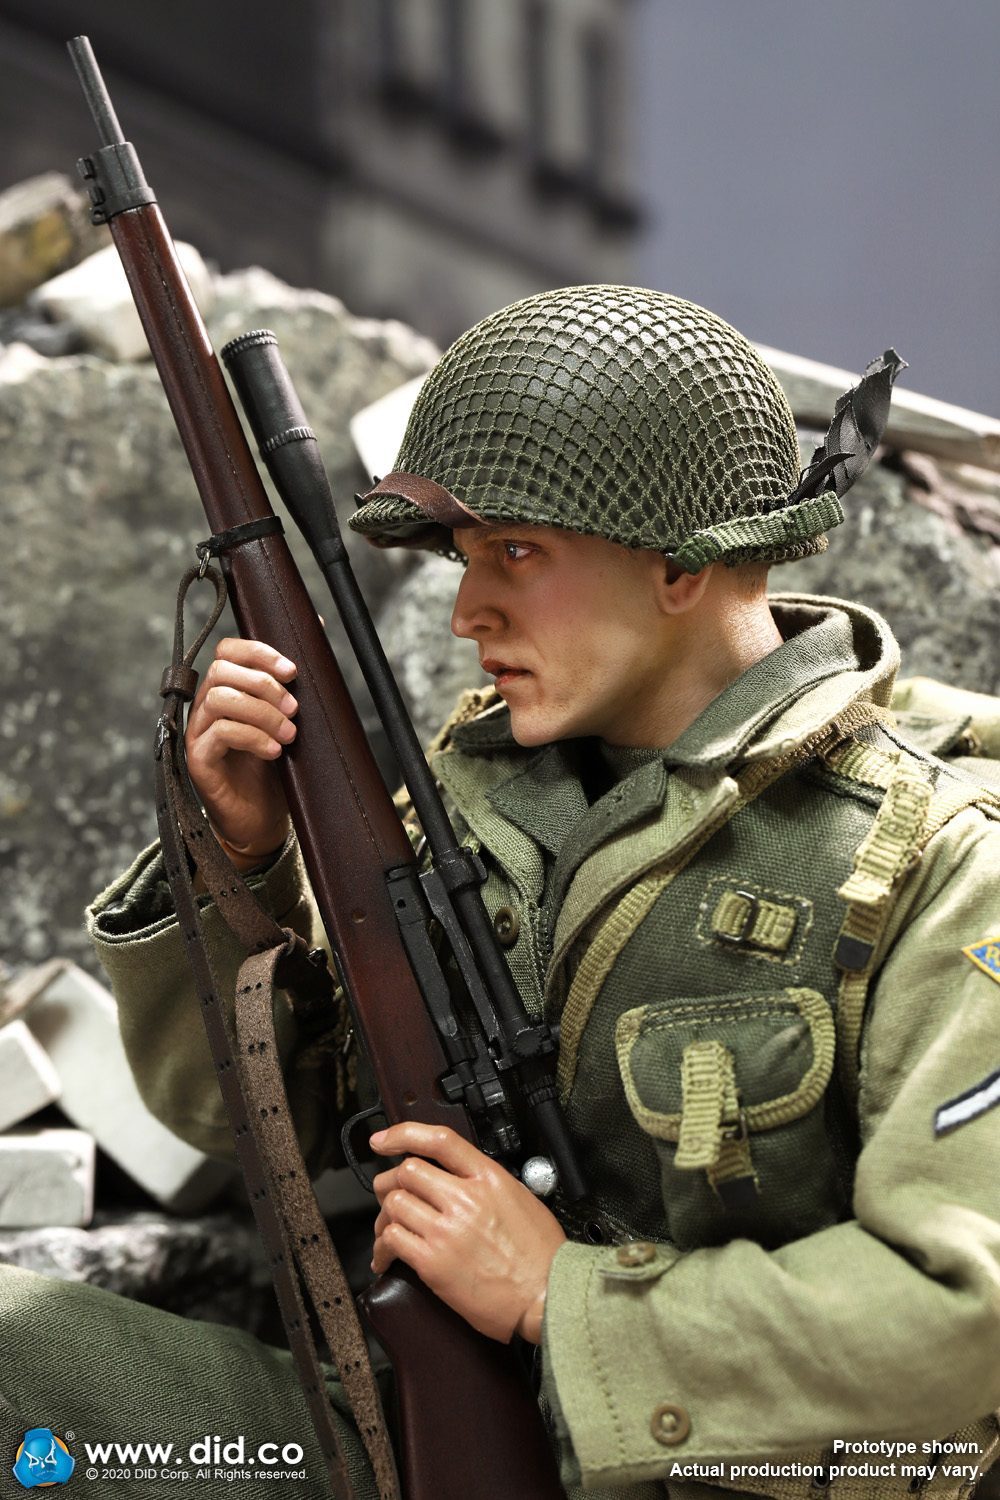 movie-based - NEW PRODUCT: DiD: A80144 WWII US 2nd Ranger Battalion Series 4 Private Jackson 2937